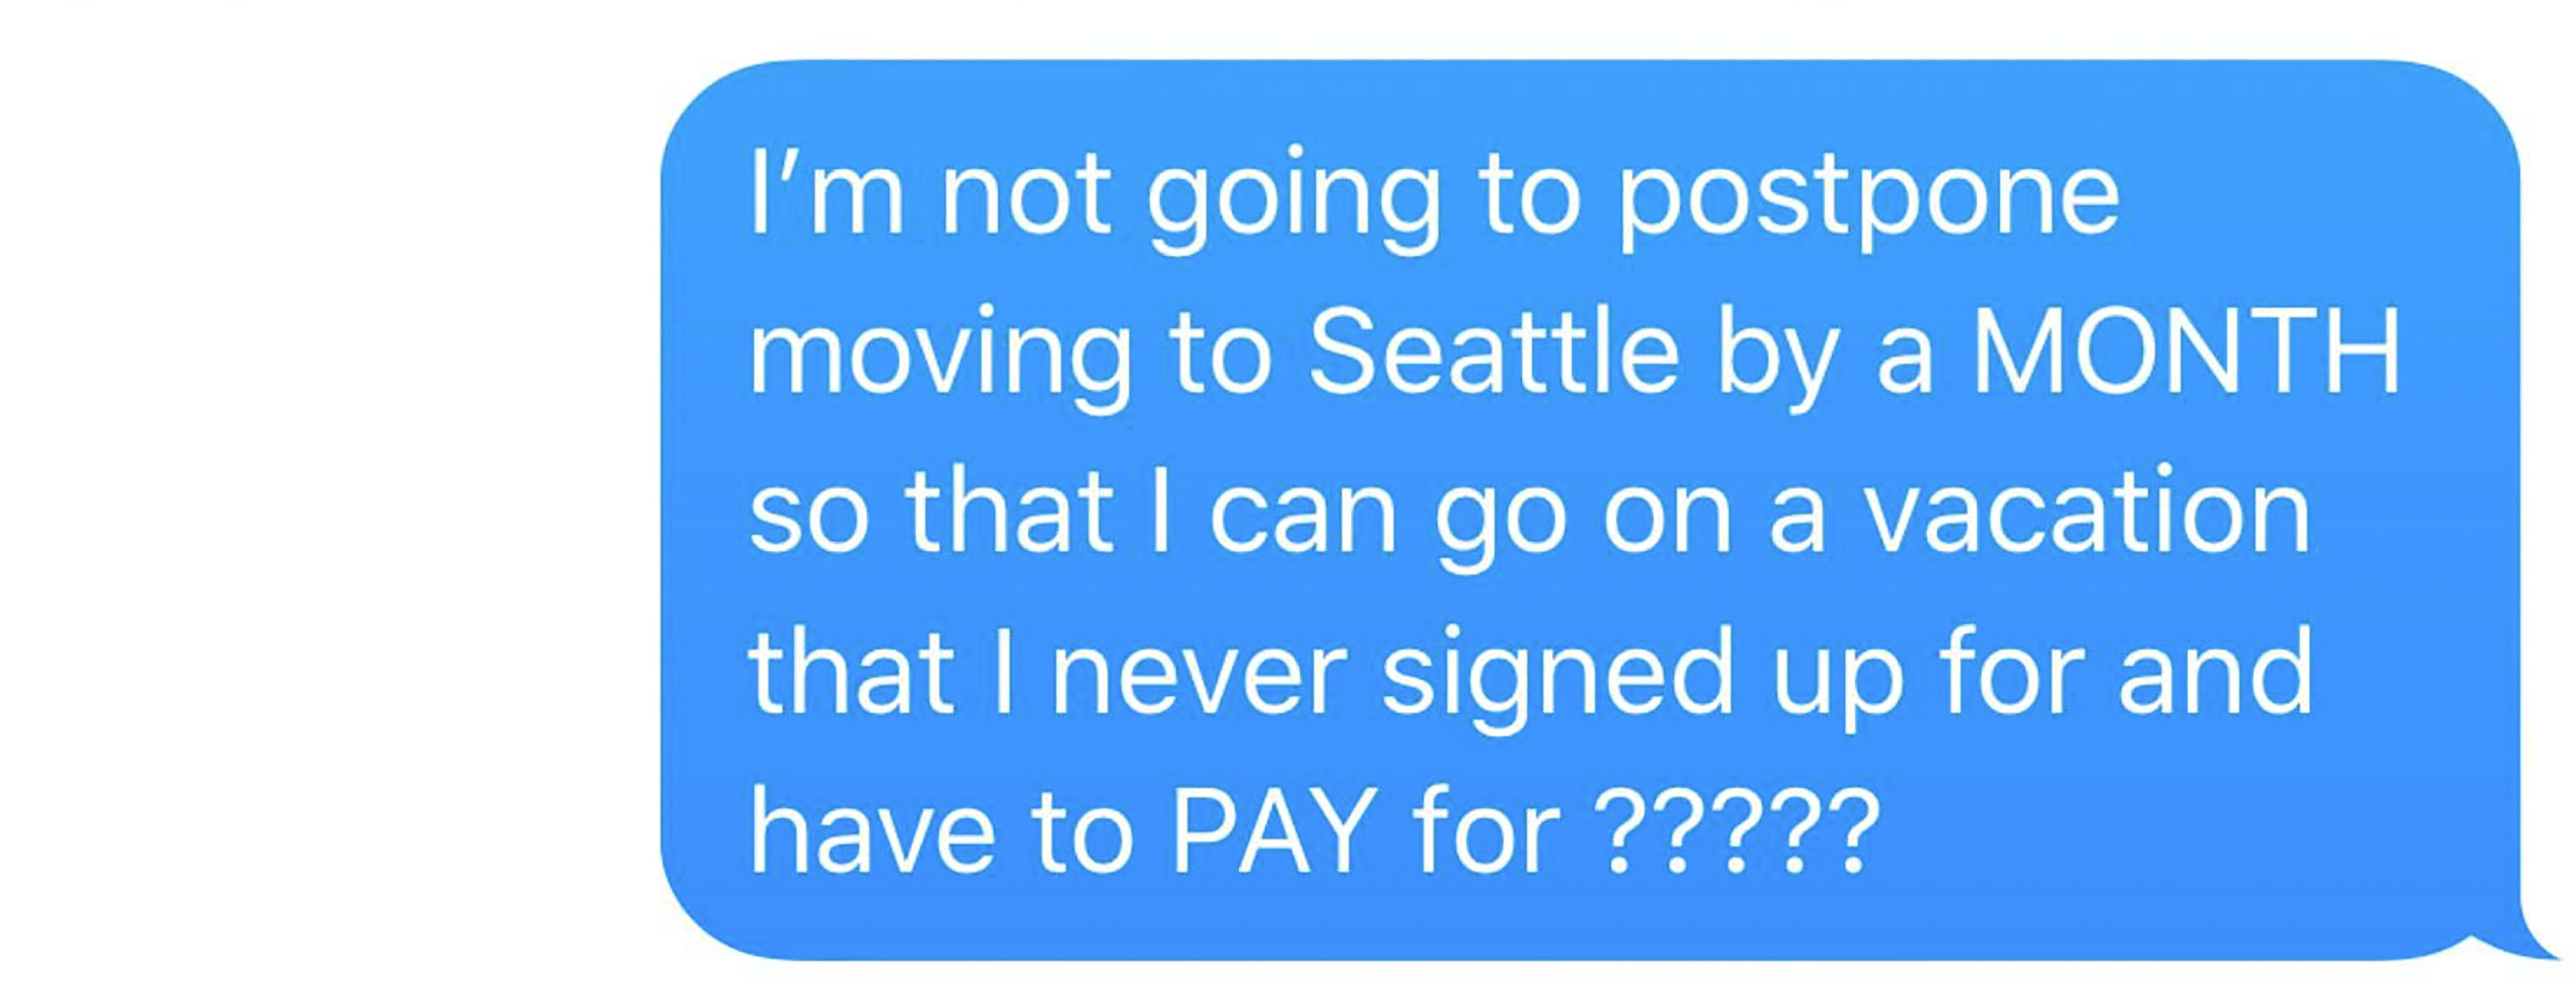 adblocker - I'm not going to postpone moving to Seattle by a Month so that I can go on a vacation that I never signed up for and have to Pay for ?????